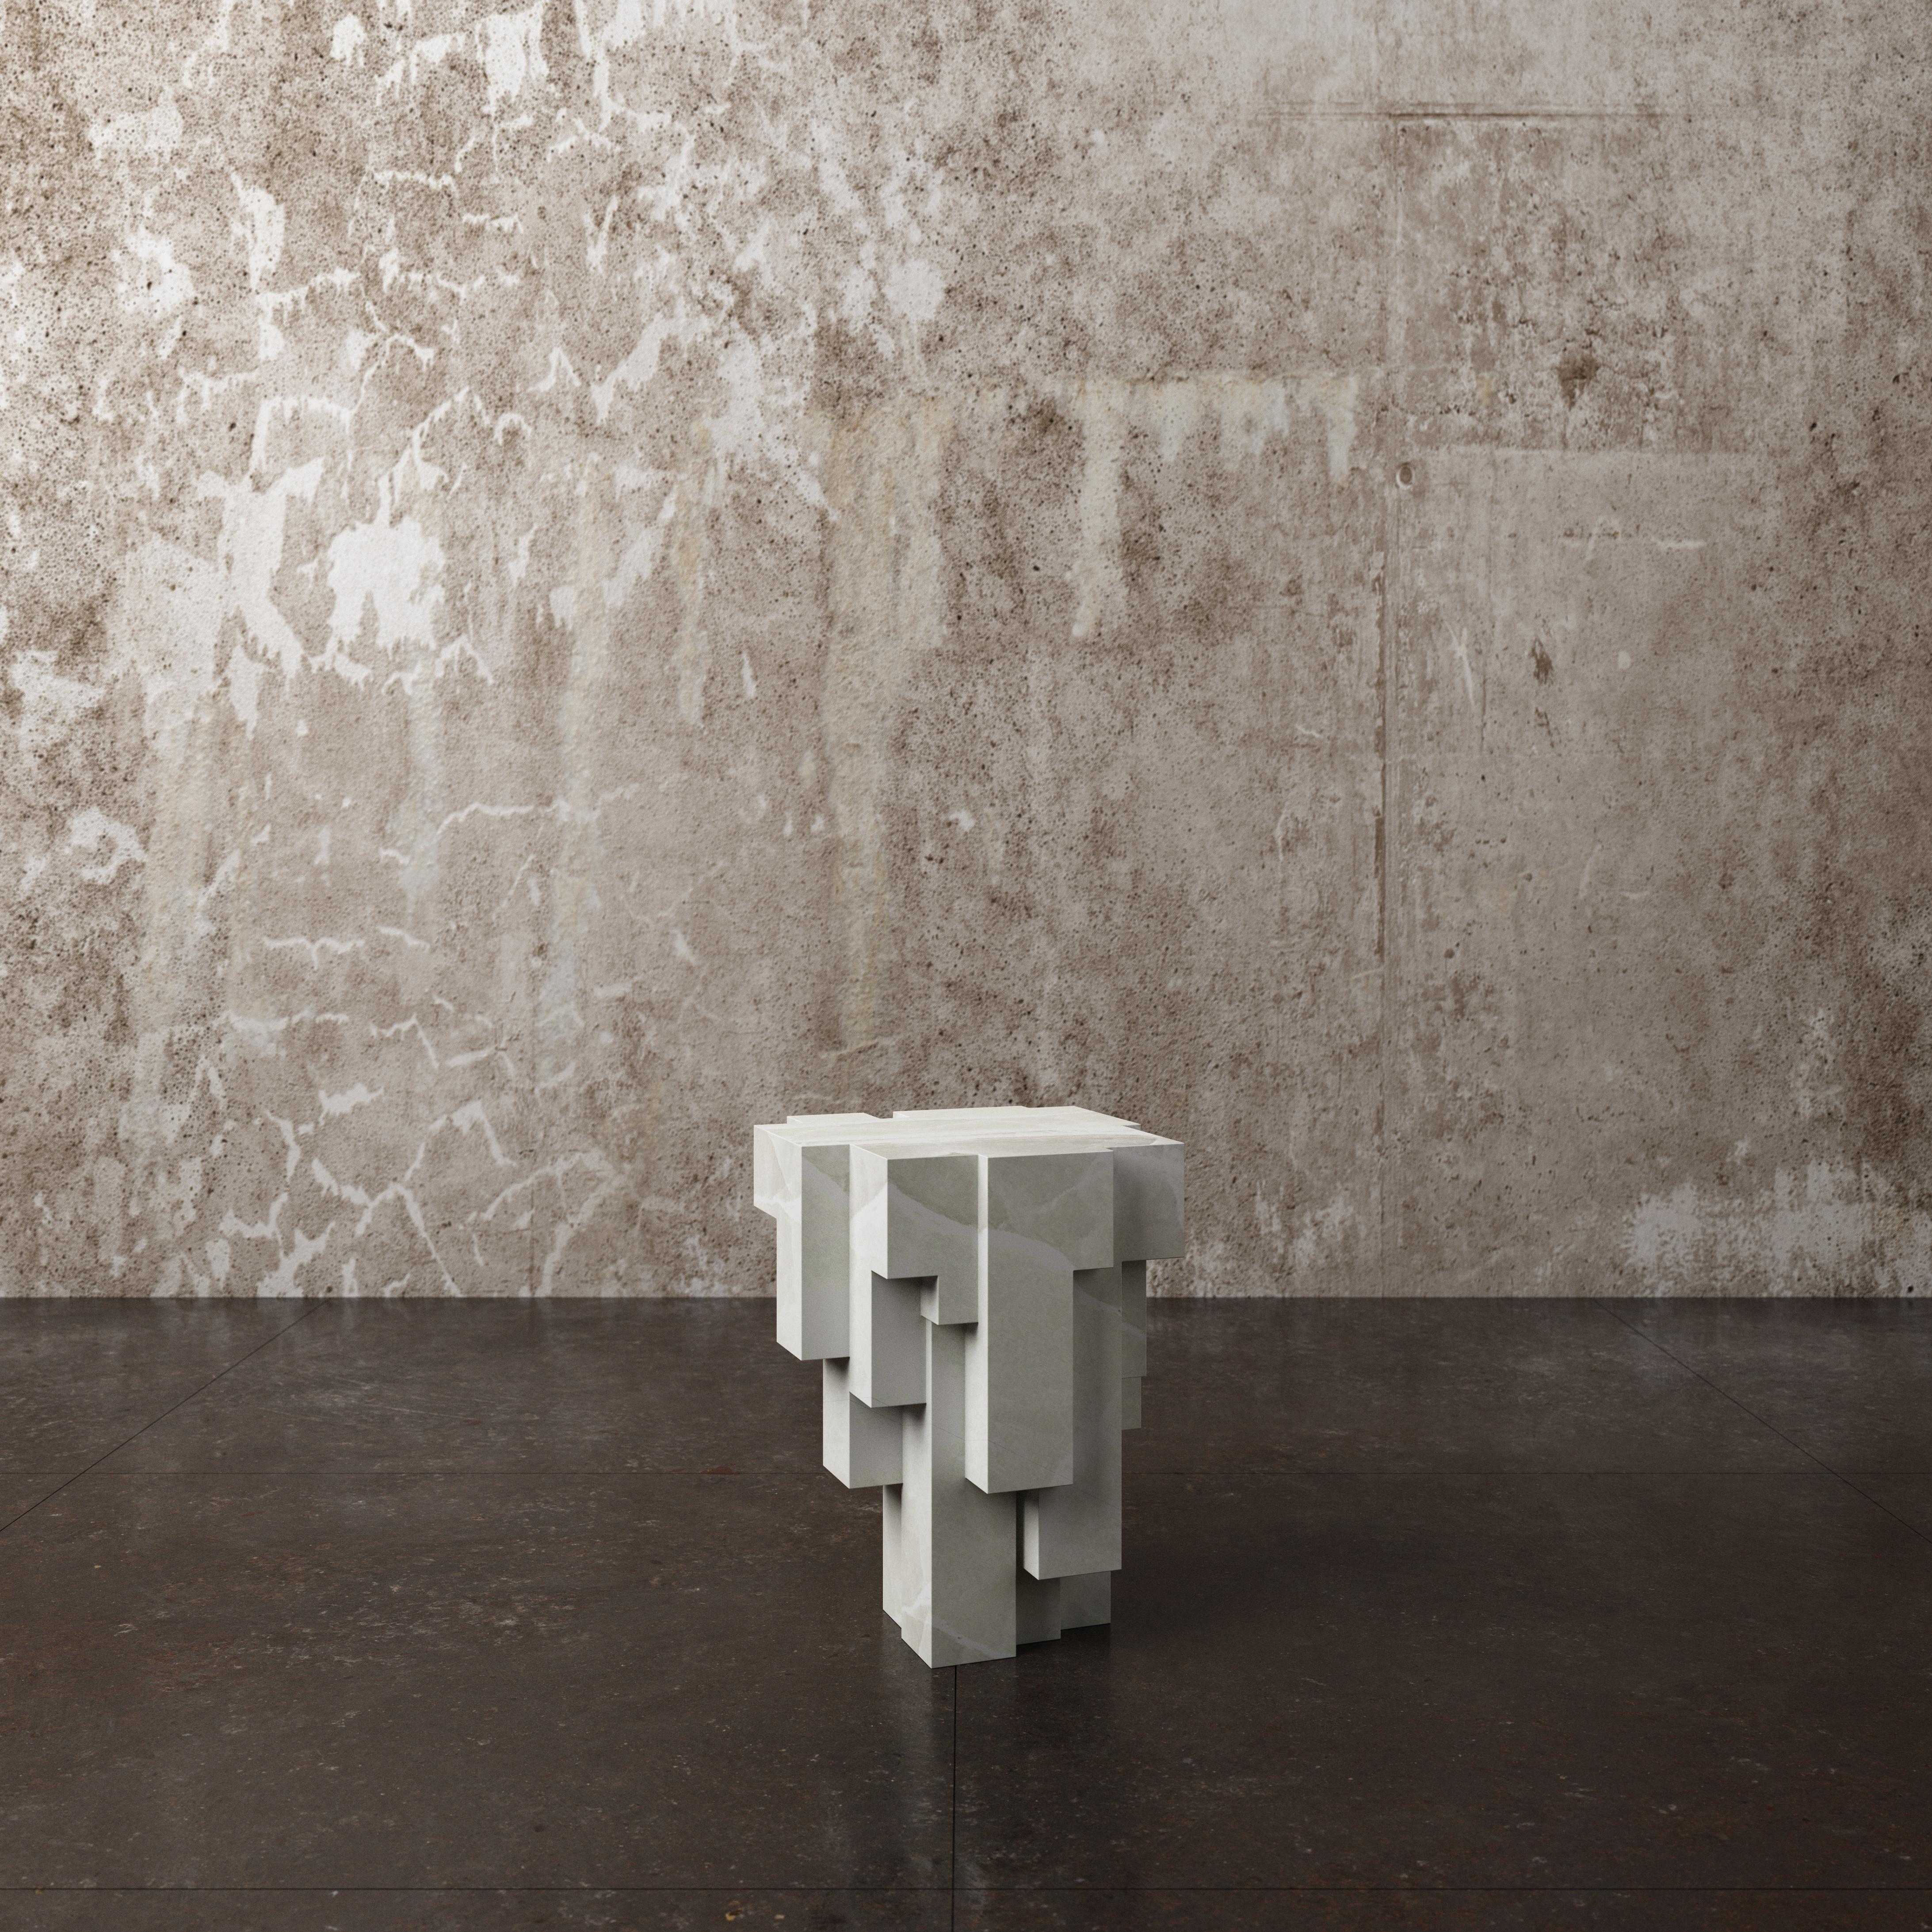 Deseo No.3 sculpted side stool by Pietro Franceschini
Sold exclusively by Galerie Philia
Materials: White Onyx
Dimensions: W 36cm, L 35cm, H 45cm
Origin: Italy (Carrara)
Manufacturer: Corsanini SRL
Available in other marbles.

Pietro